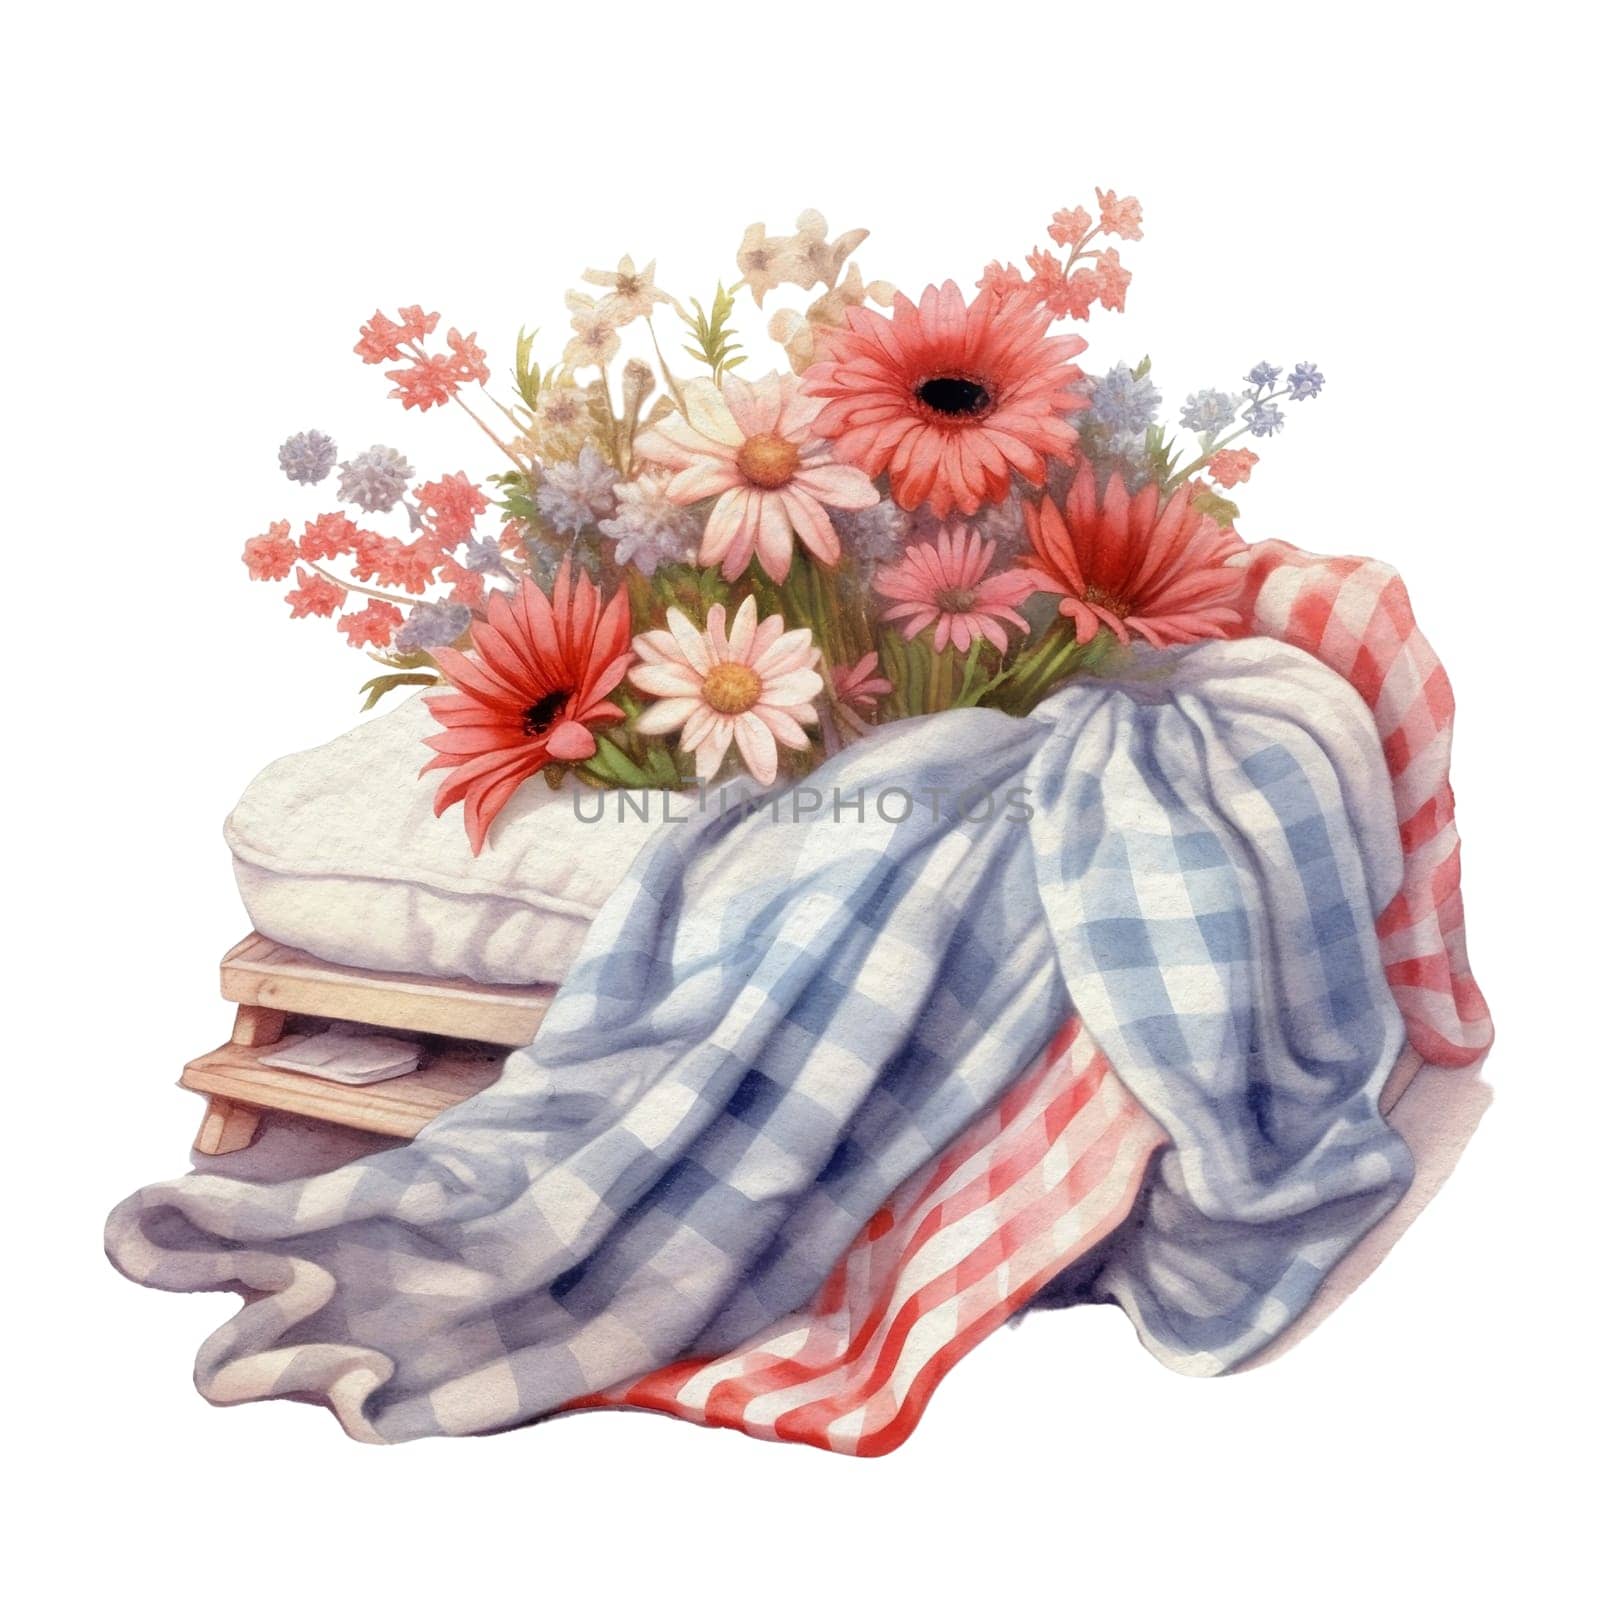 Watercolor 4th of July Independence Day Flowers Cushion and Blanket Decoration Illustration Clipart by Skyecreativestudio